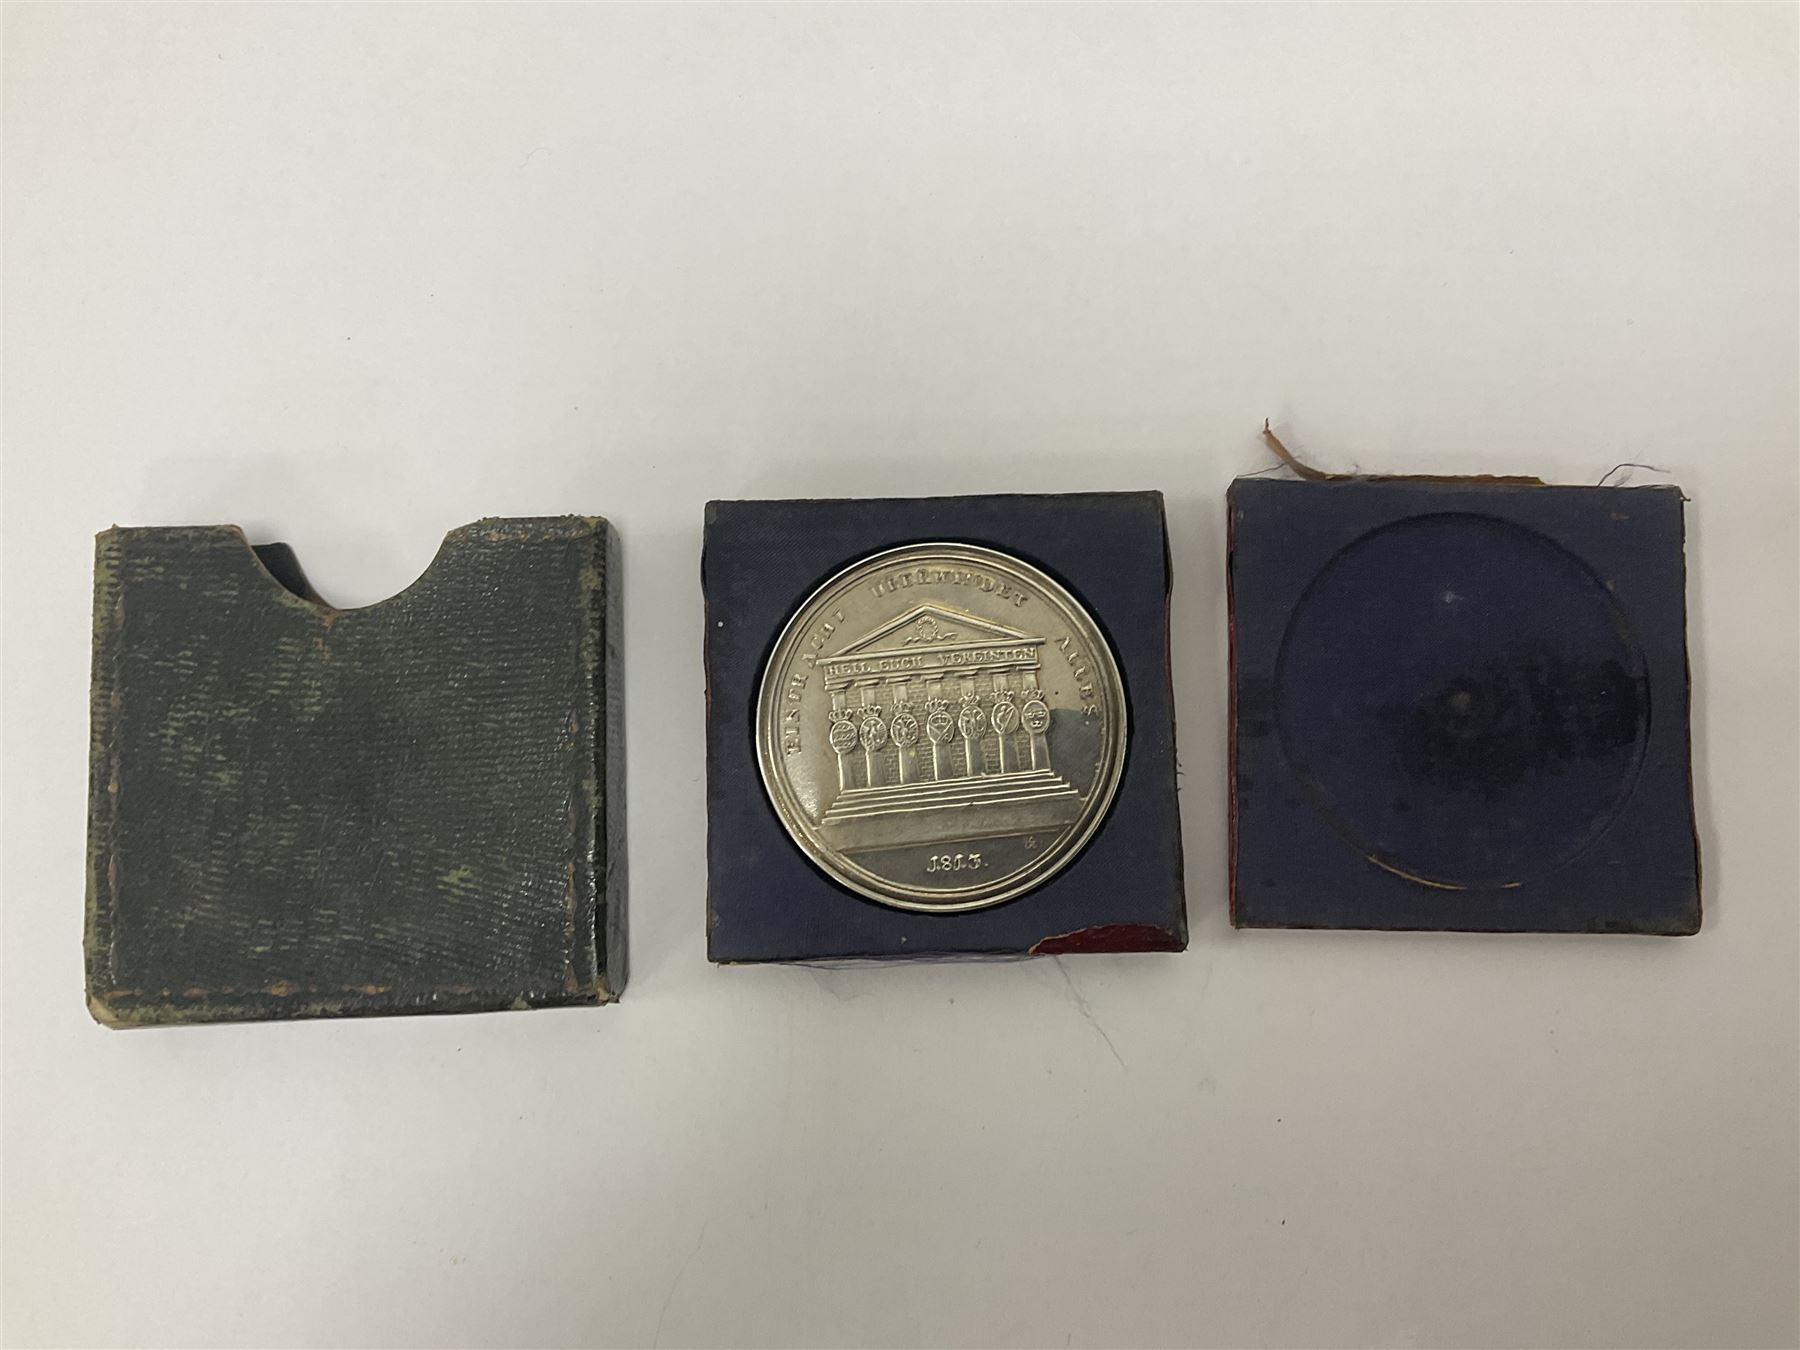 Grolier Club’s silver Schraubmedaille to commemorate the German campaign of 1813 - Image 18 of 18